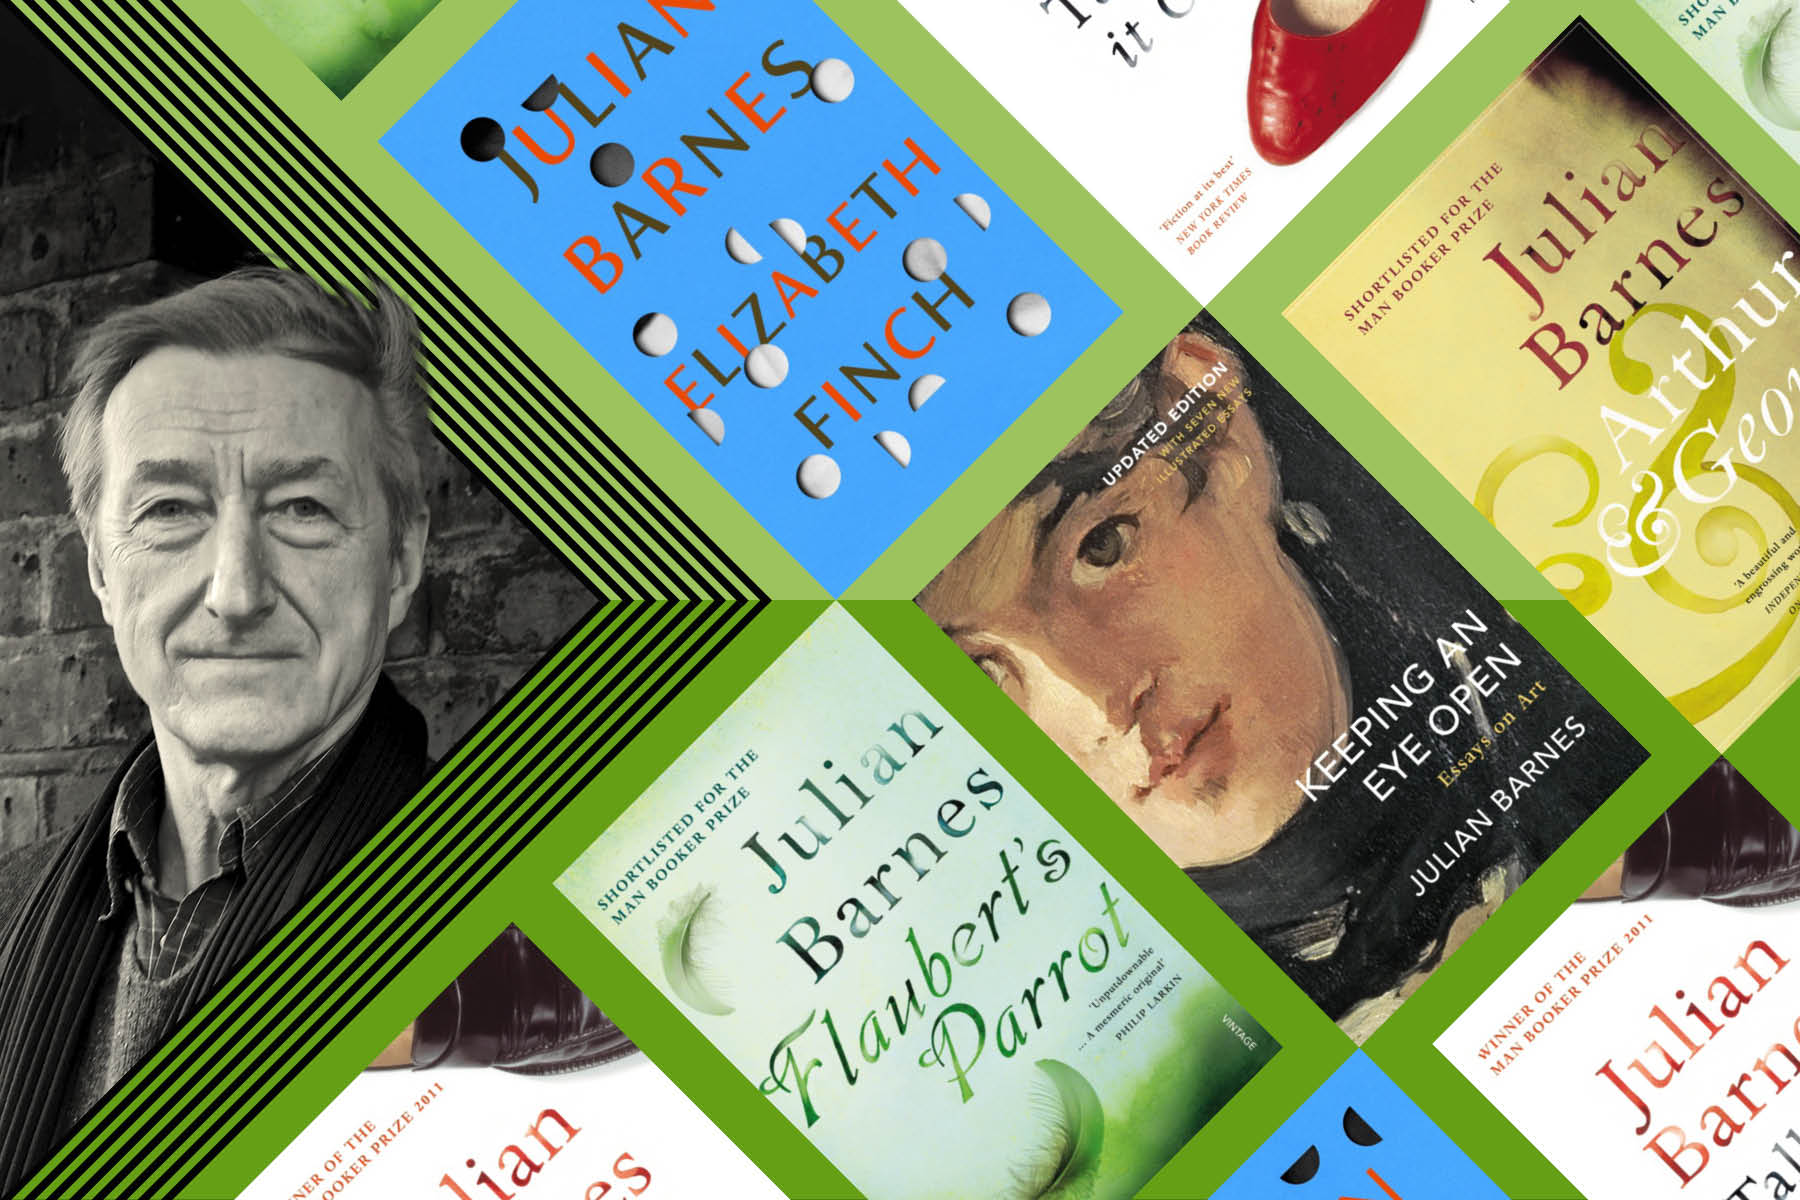 A black-and-white photograph of Julian Barnes, on the left, next to a large green arrow towards a flatlay of his book covers